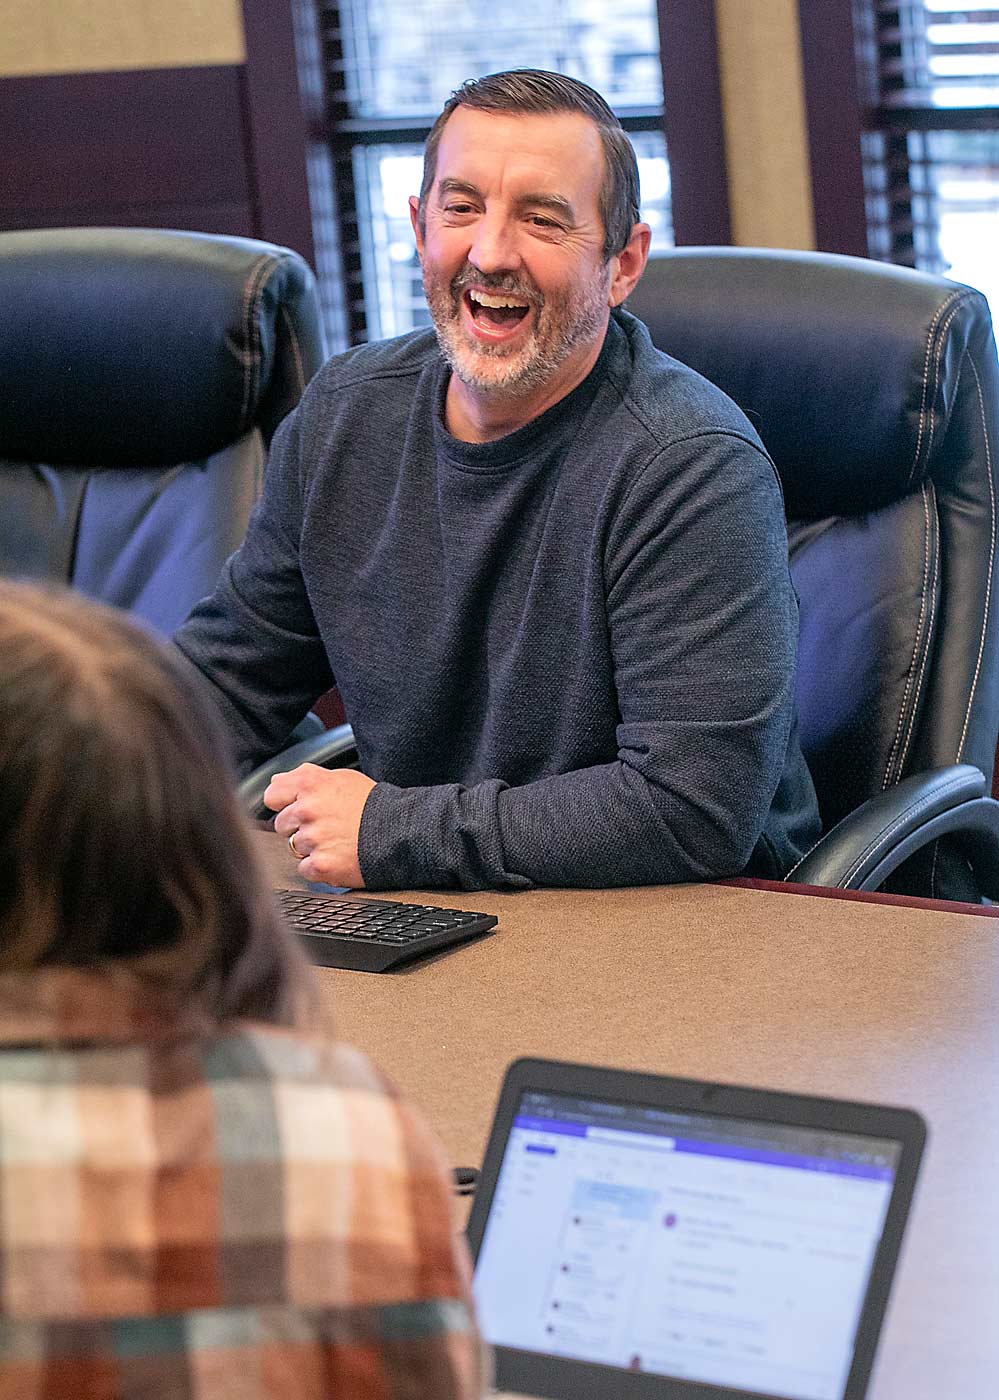 Clint Novak, chief financial officer at Allan Bros., laughs with student interns as they consider how to prioritize their finances in personal budgets. (TJ Mullinax/Good Fruit Grower)